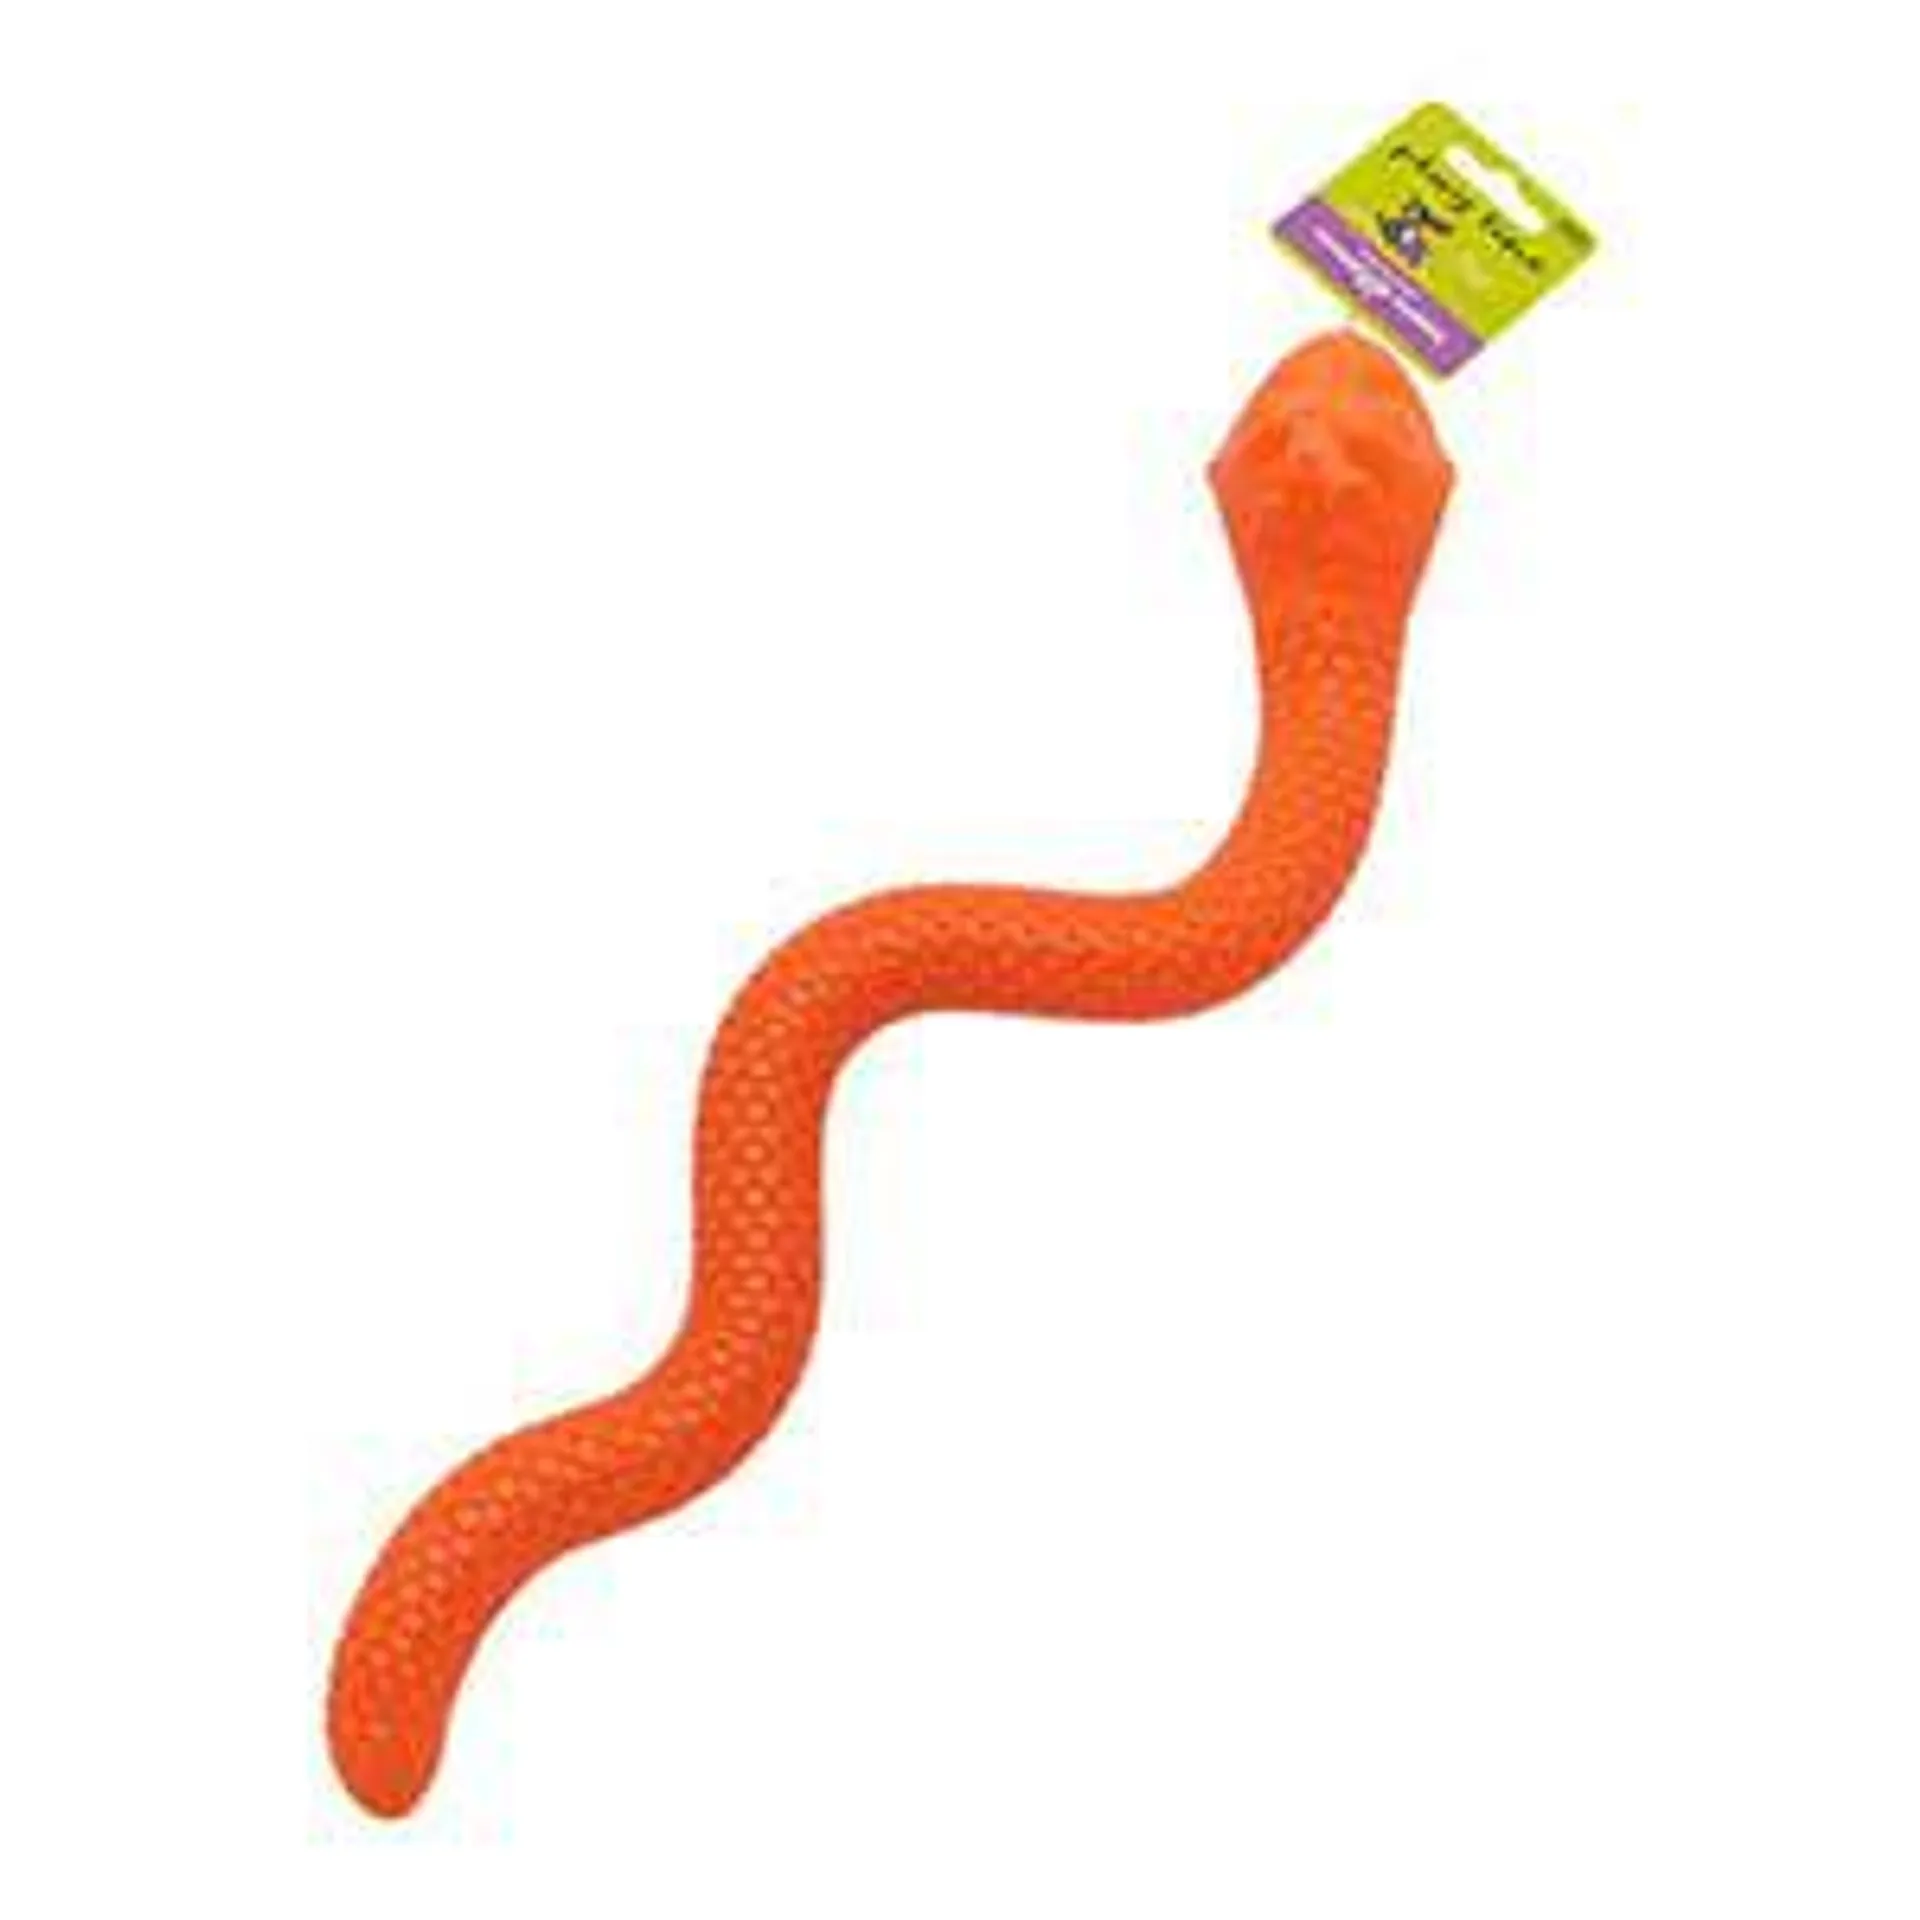 Pets at Home Snuggle and Cuddle Rubber Snake Dog Toy